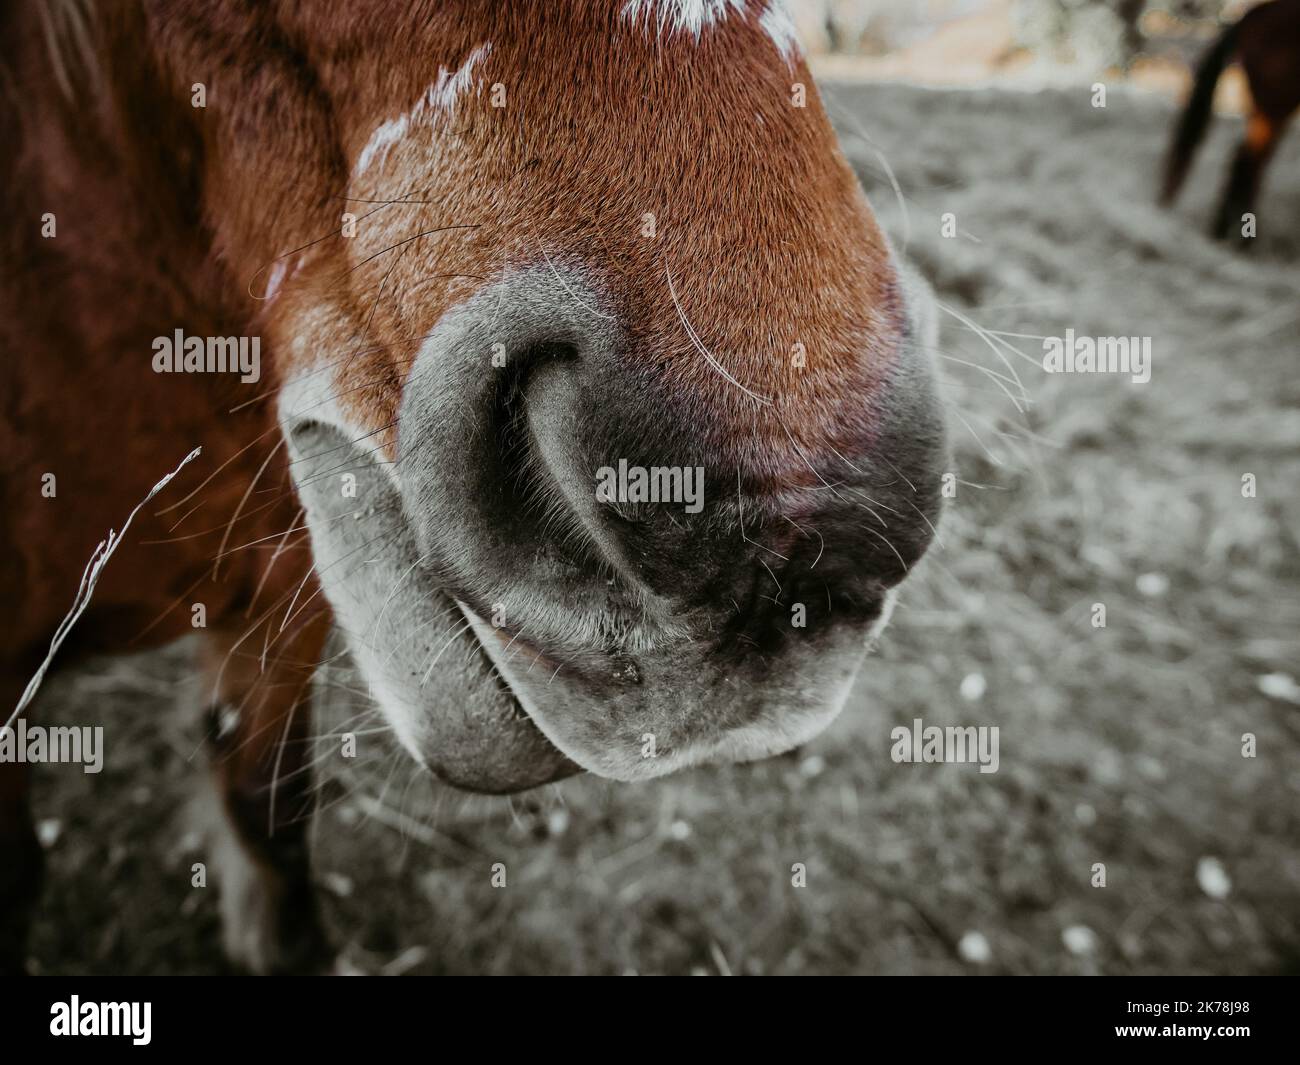 Close-up of a brown horse's face Stock Photo